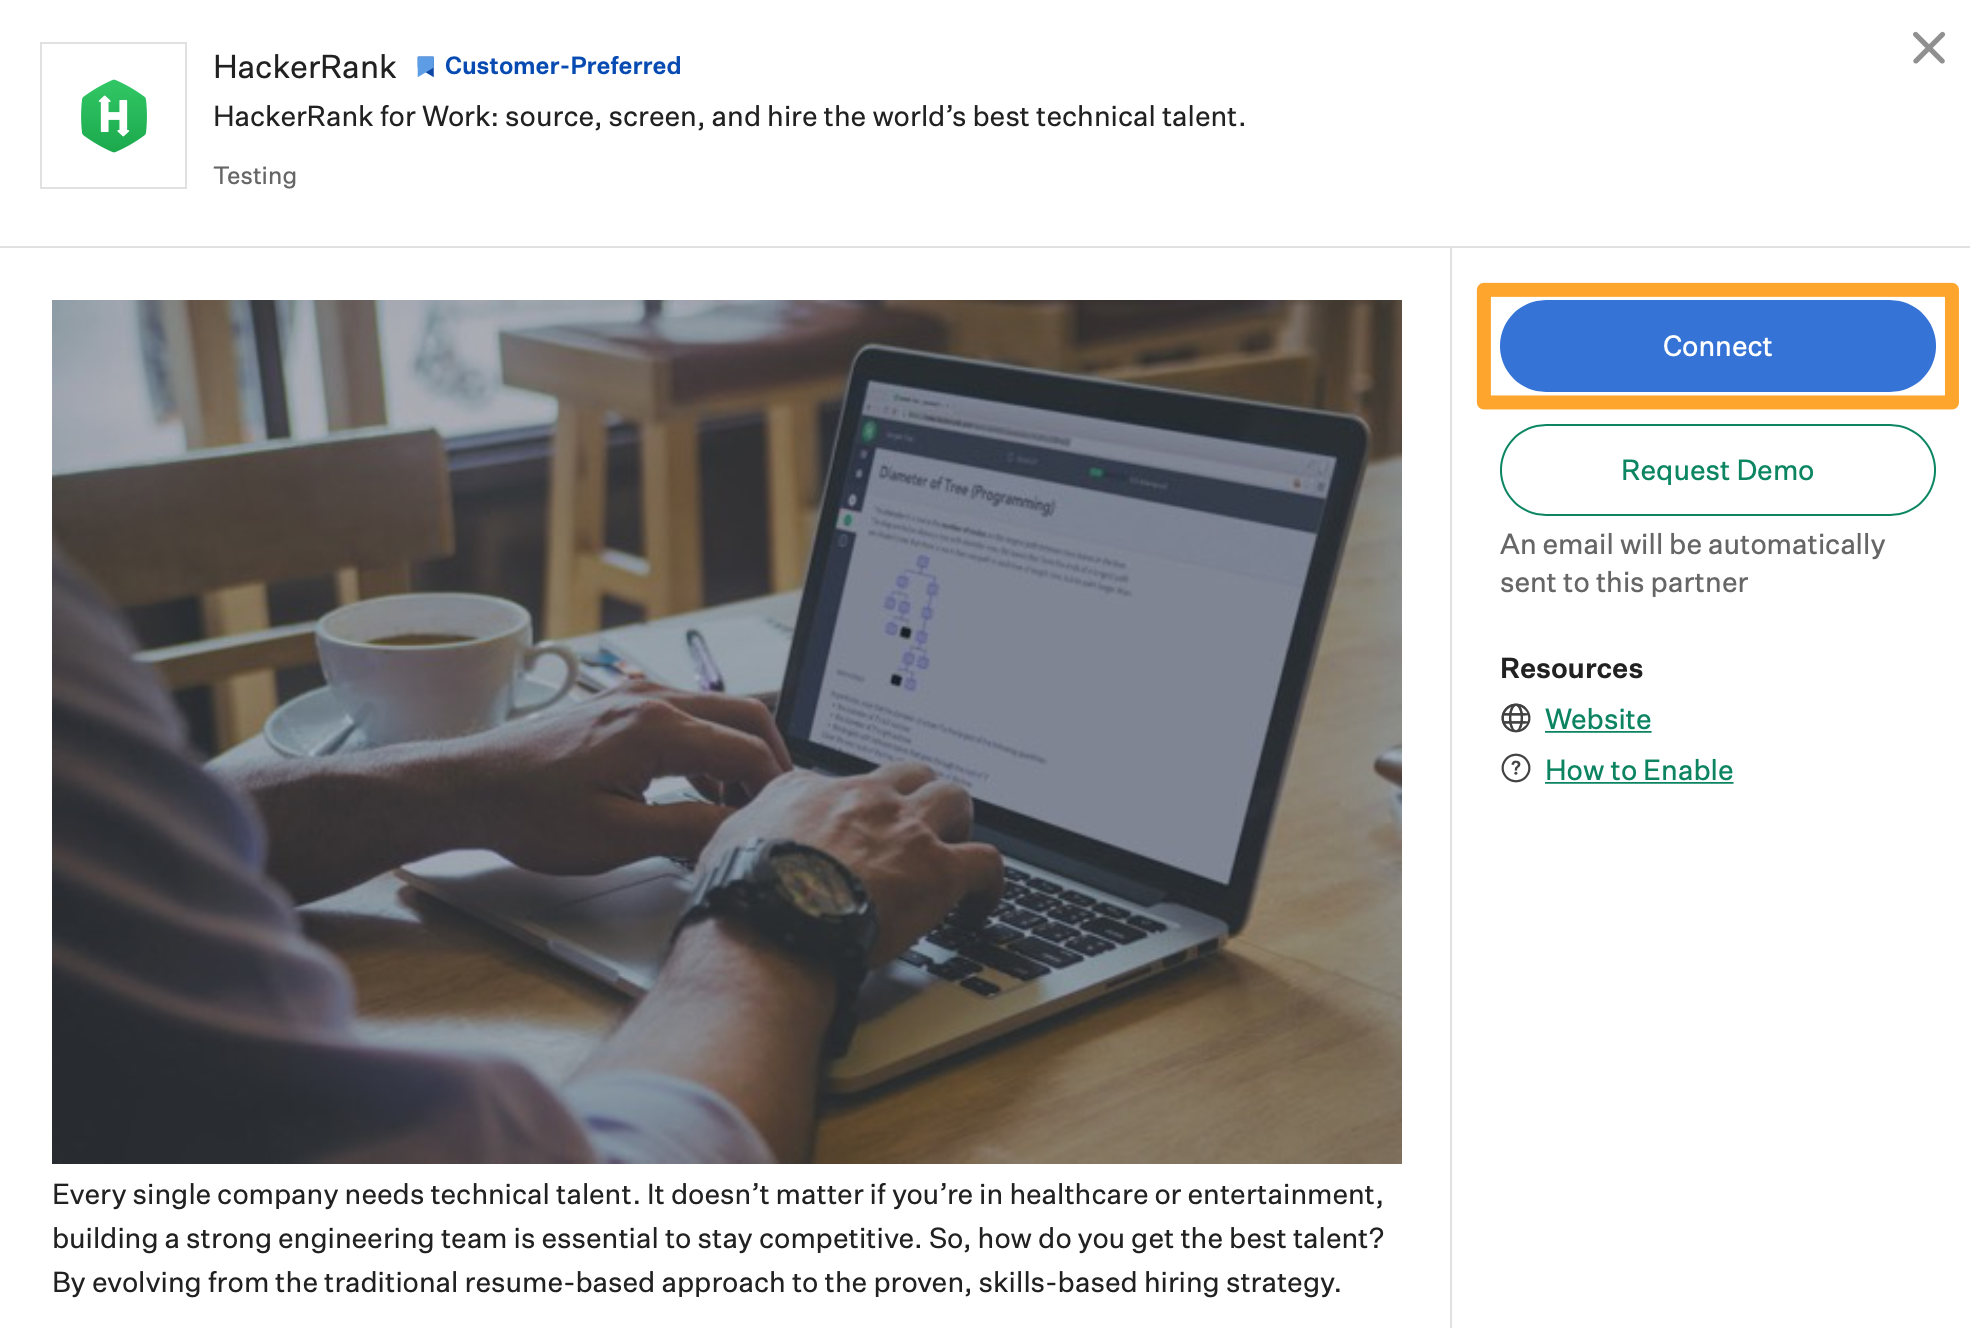 The Connect button is highlighted in marigold on the HackerRank integration